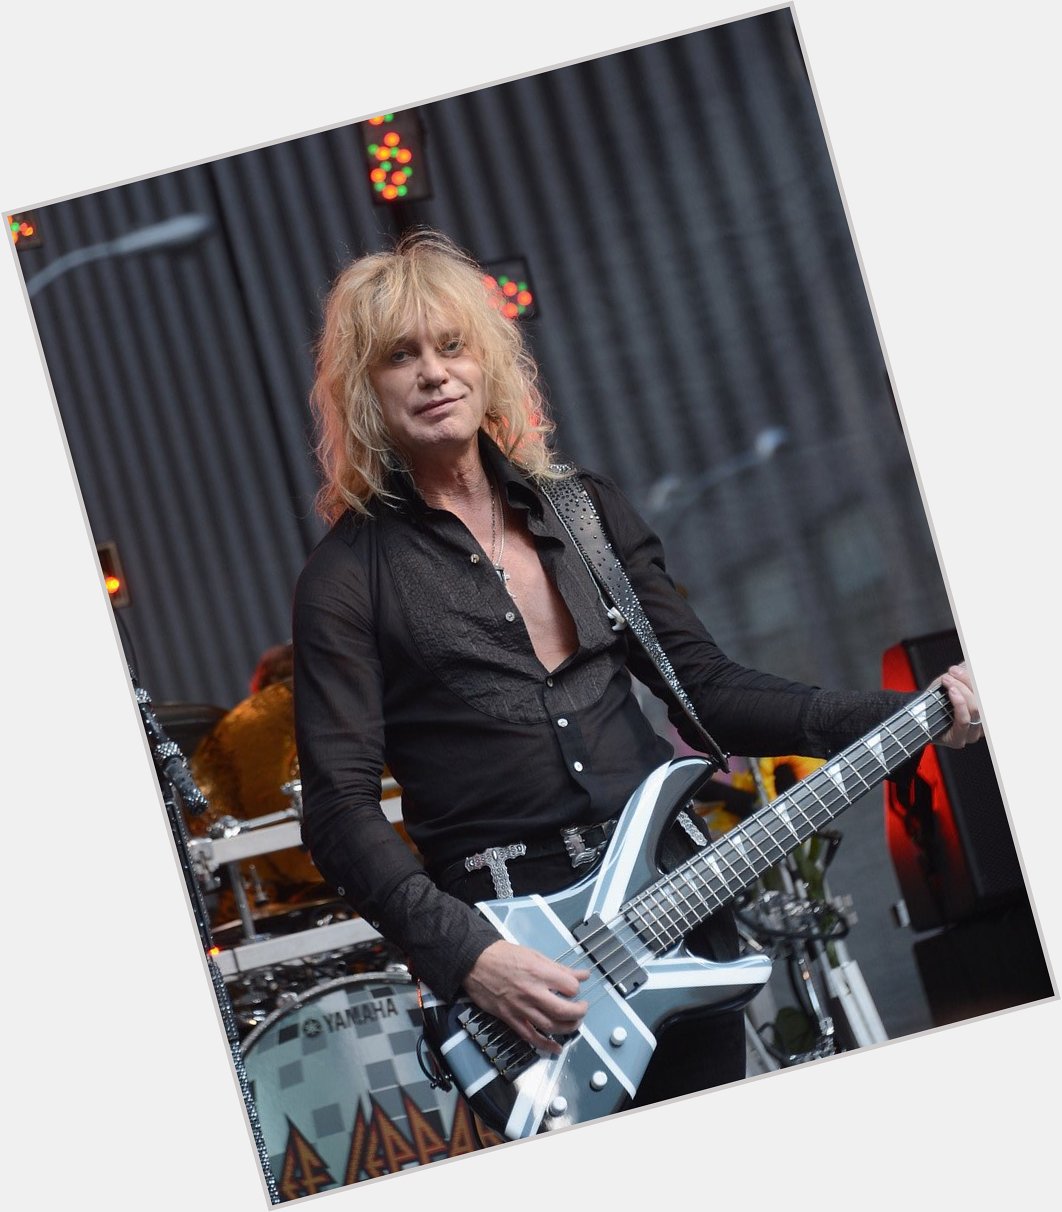 Happy Birthday to founding member of Def Leppard, Rick Savage, born Dec 2nd 1960 